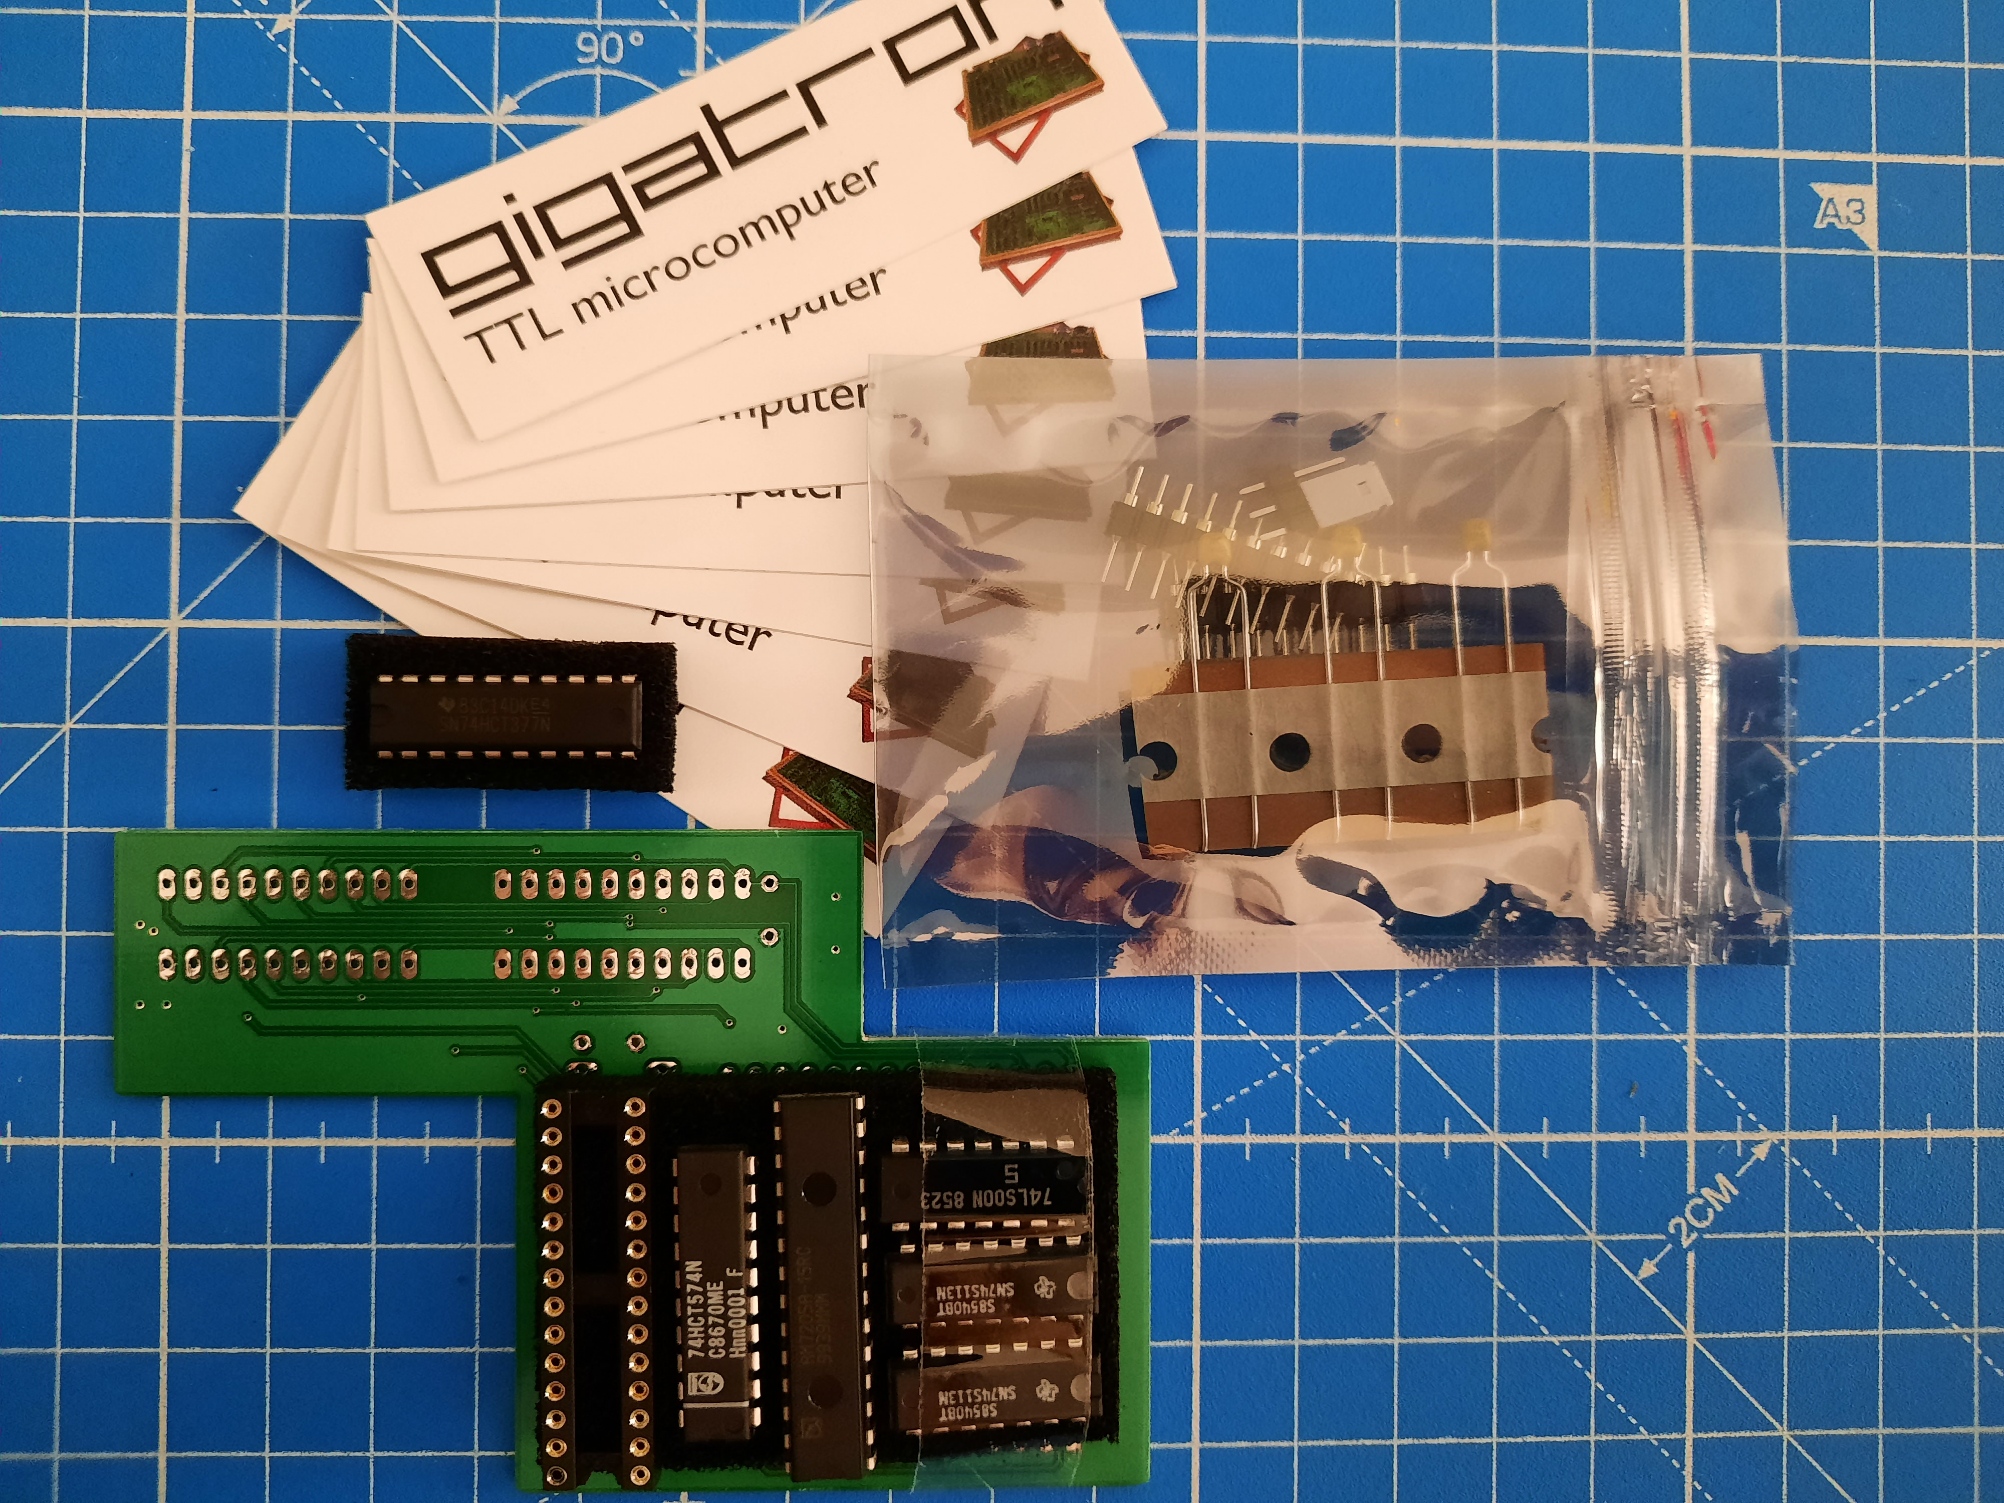 complete Gigatron Video Reapeater kit